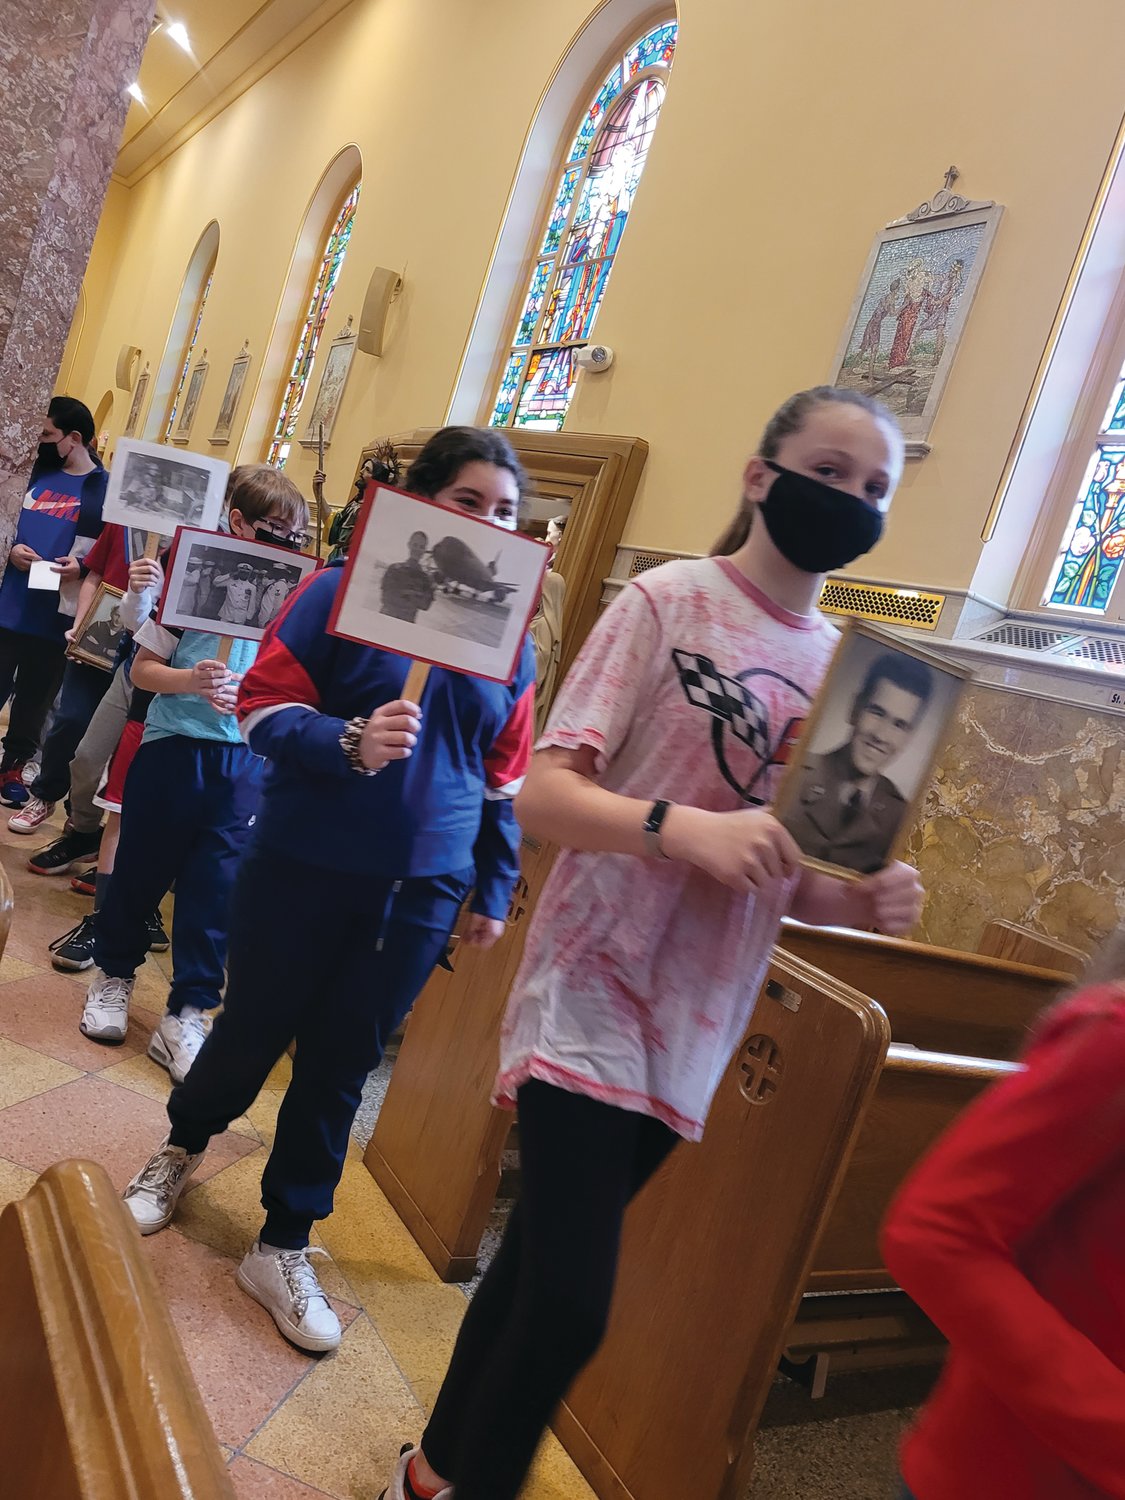 The students of St. Rocco School in Johnston walked down the church isles holding photographs of veterans they loved. The school held a prayer service for veterans on Wednesday morning at St. Rocco Church.